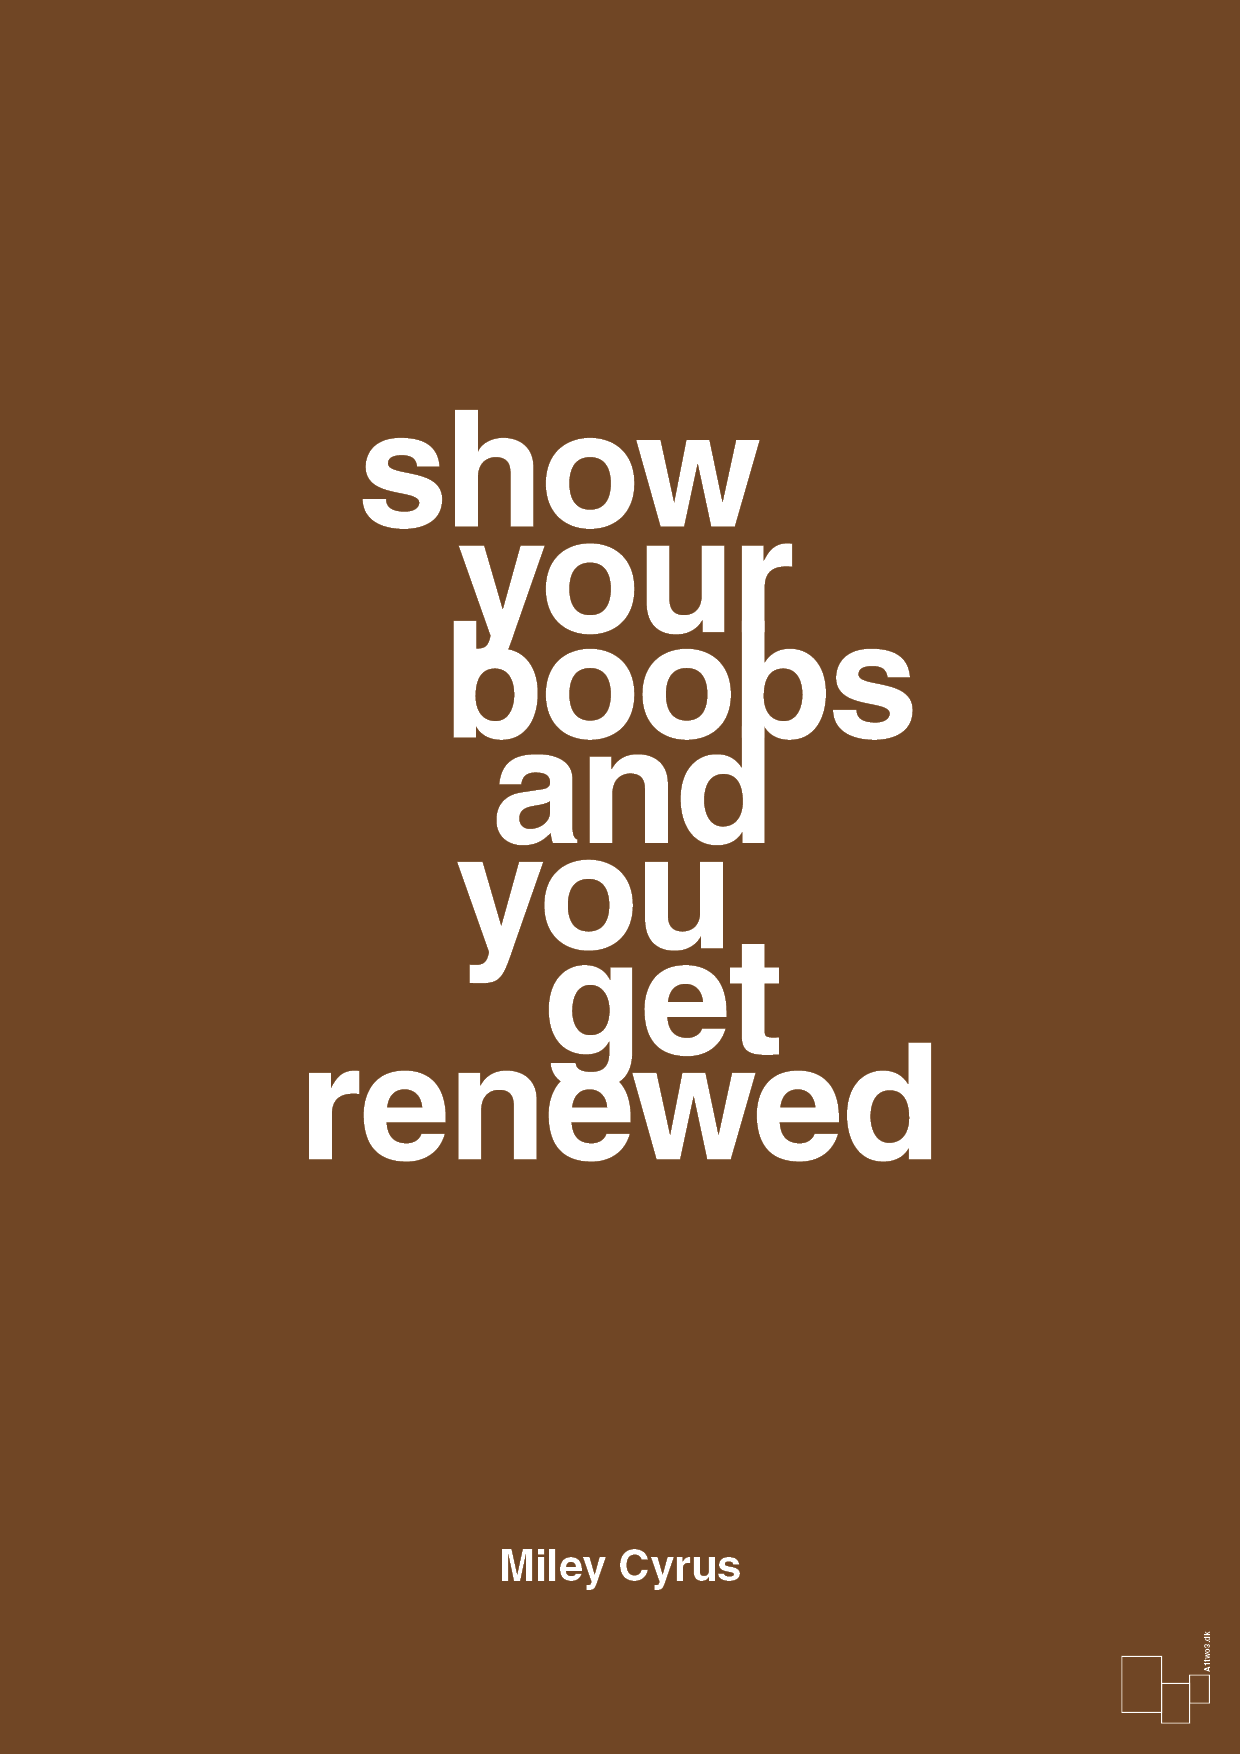 show your boobs and you get renewed - Plakat med Citater i Dark Brown